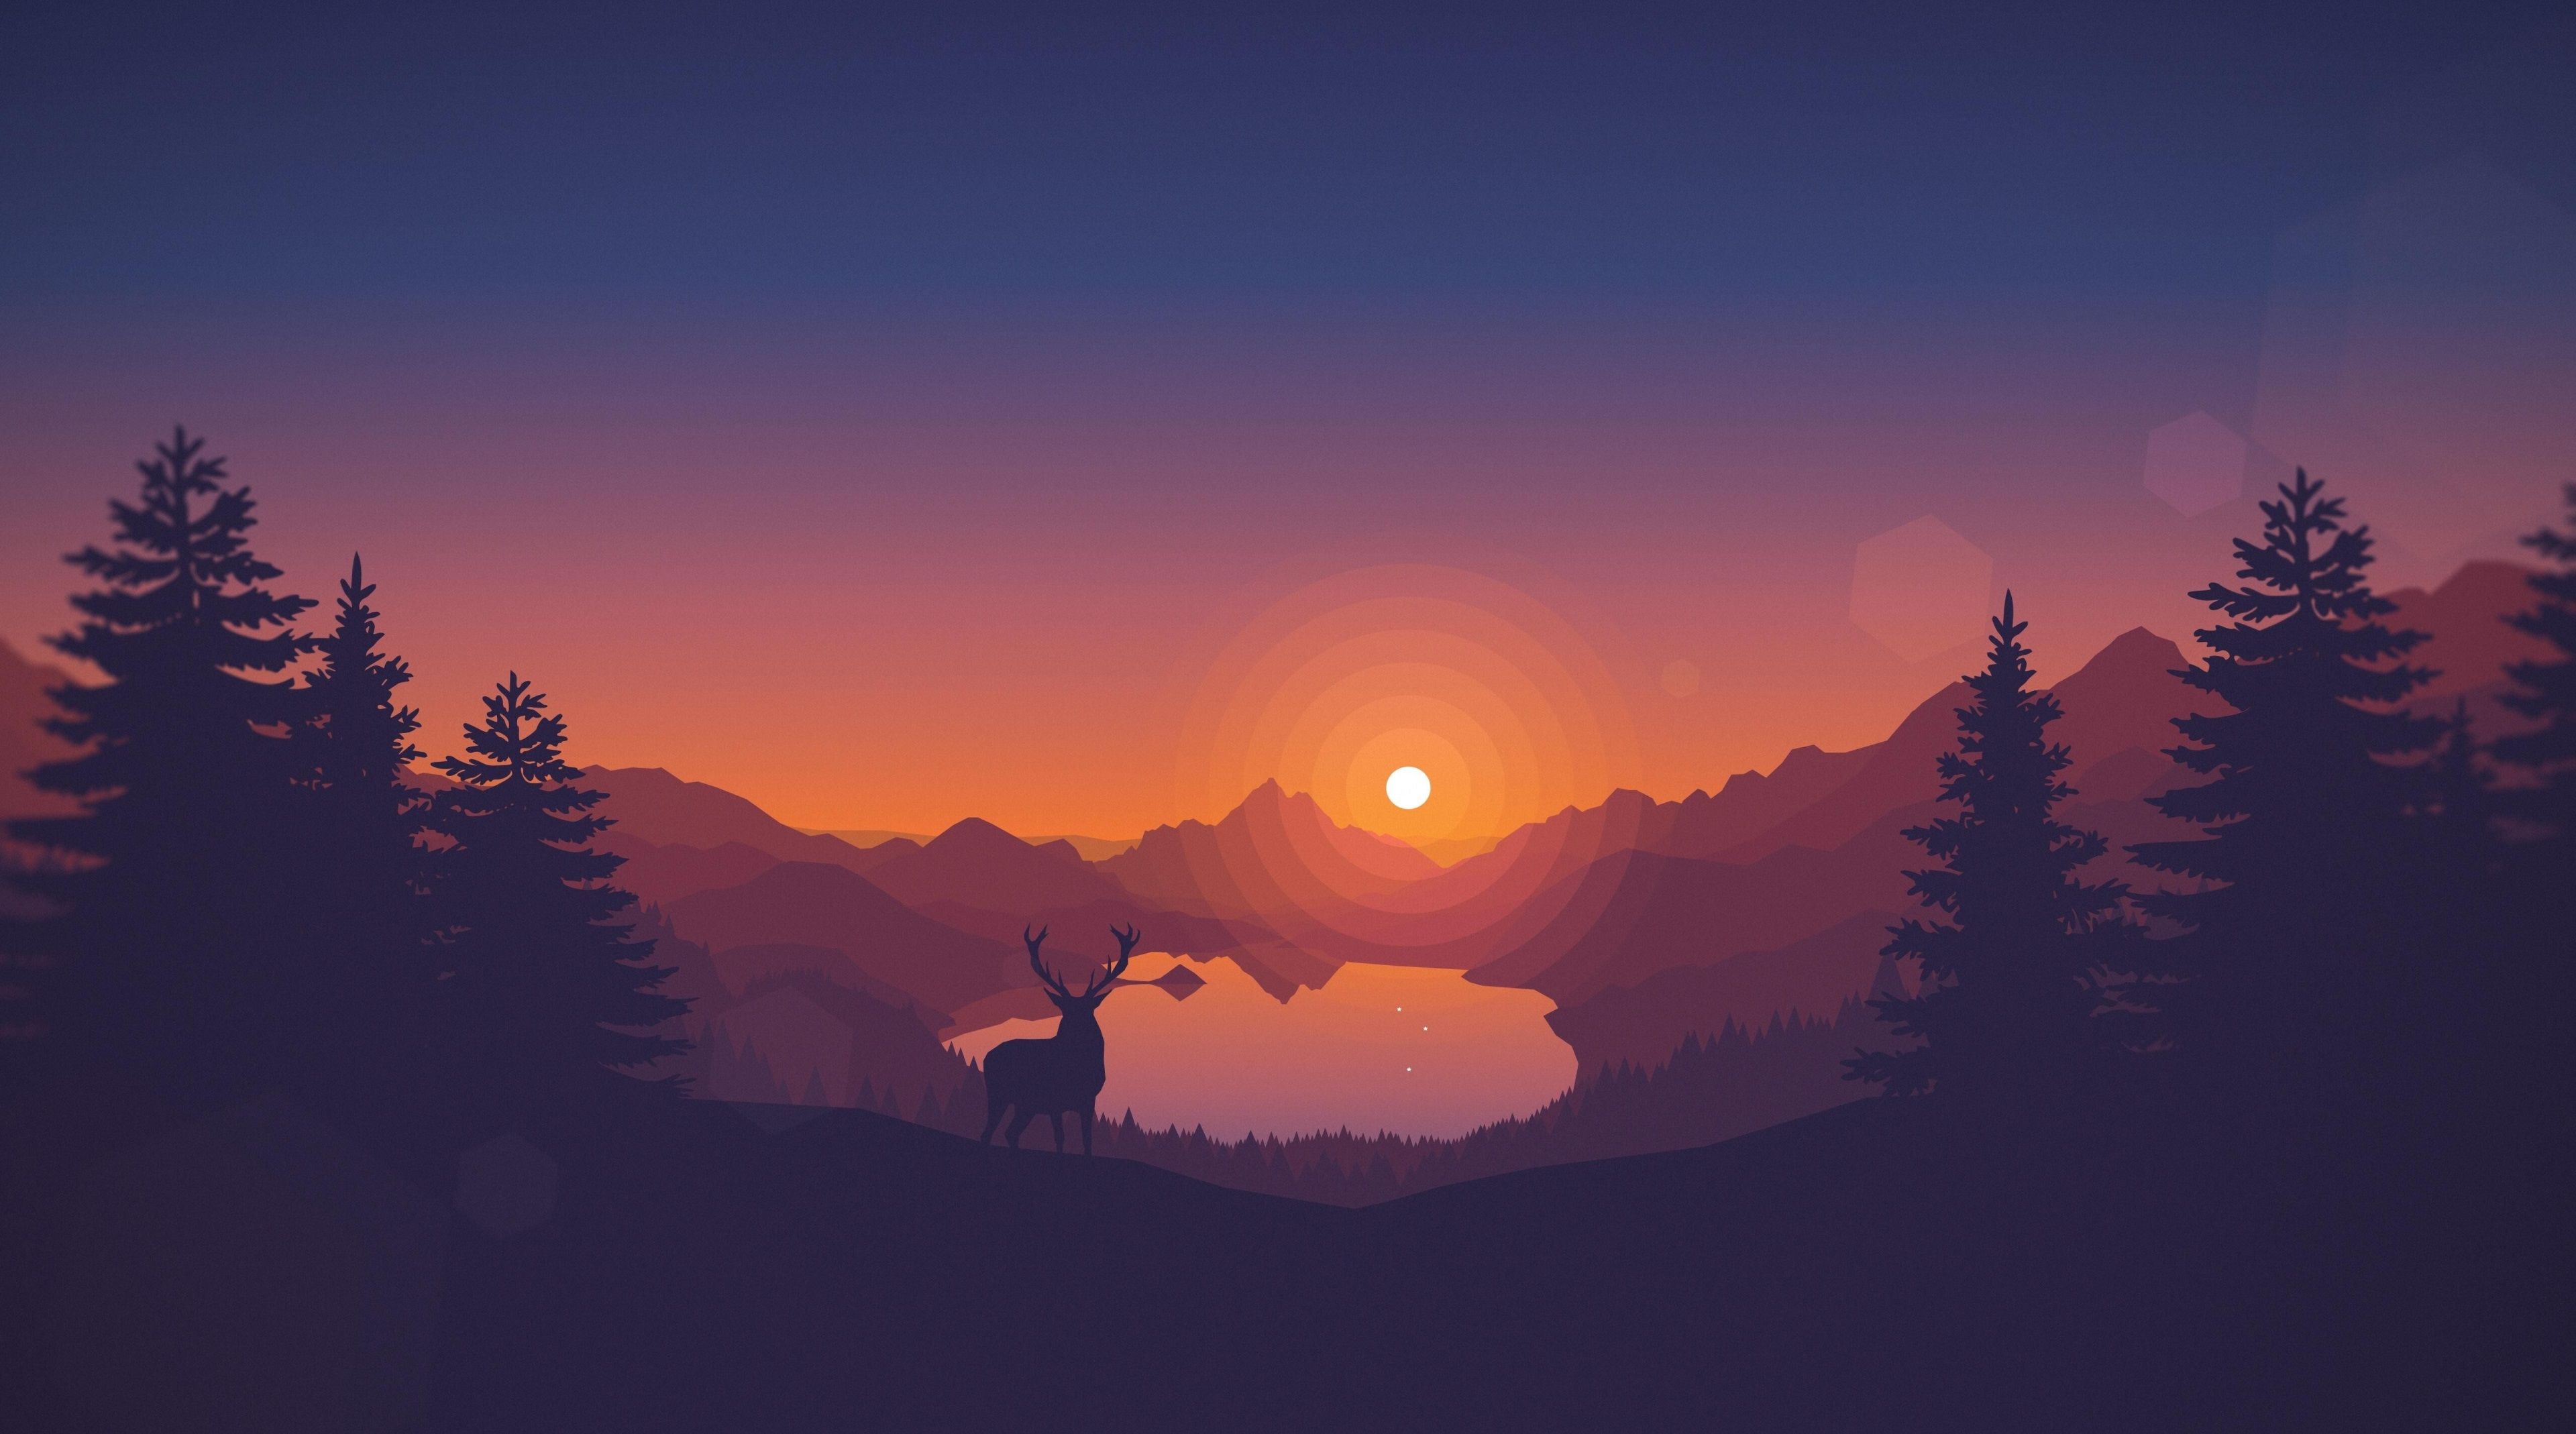 Free download 3840x2138 firewatch 4k desktop wallpaper cool photography in [3840x2138] for your Desktop, Mobile & Tablet. Explore 4K PC WallpaperK PC Wallpaper, 4K Wallpaper for PC, Retro